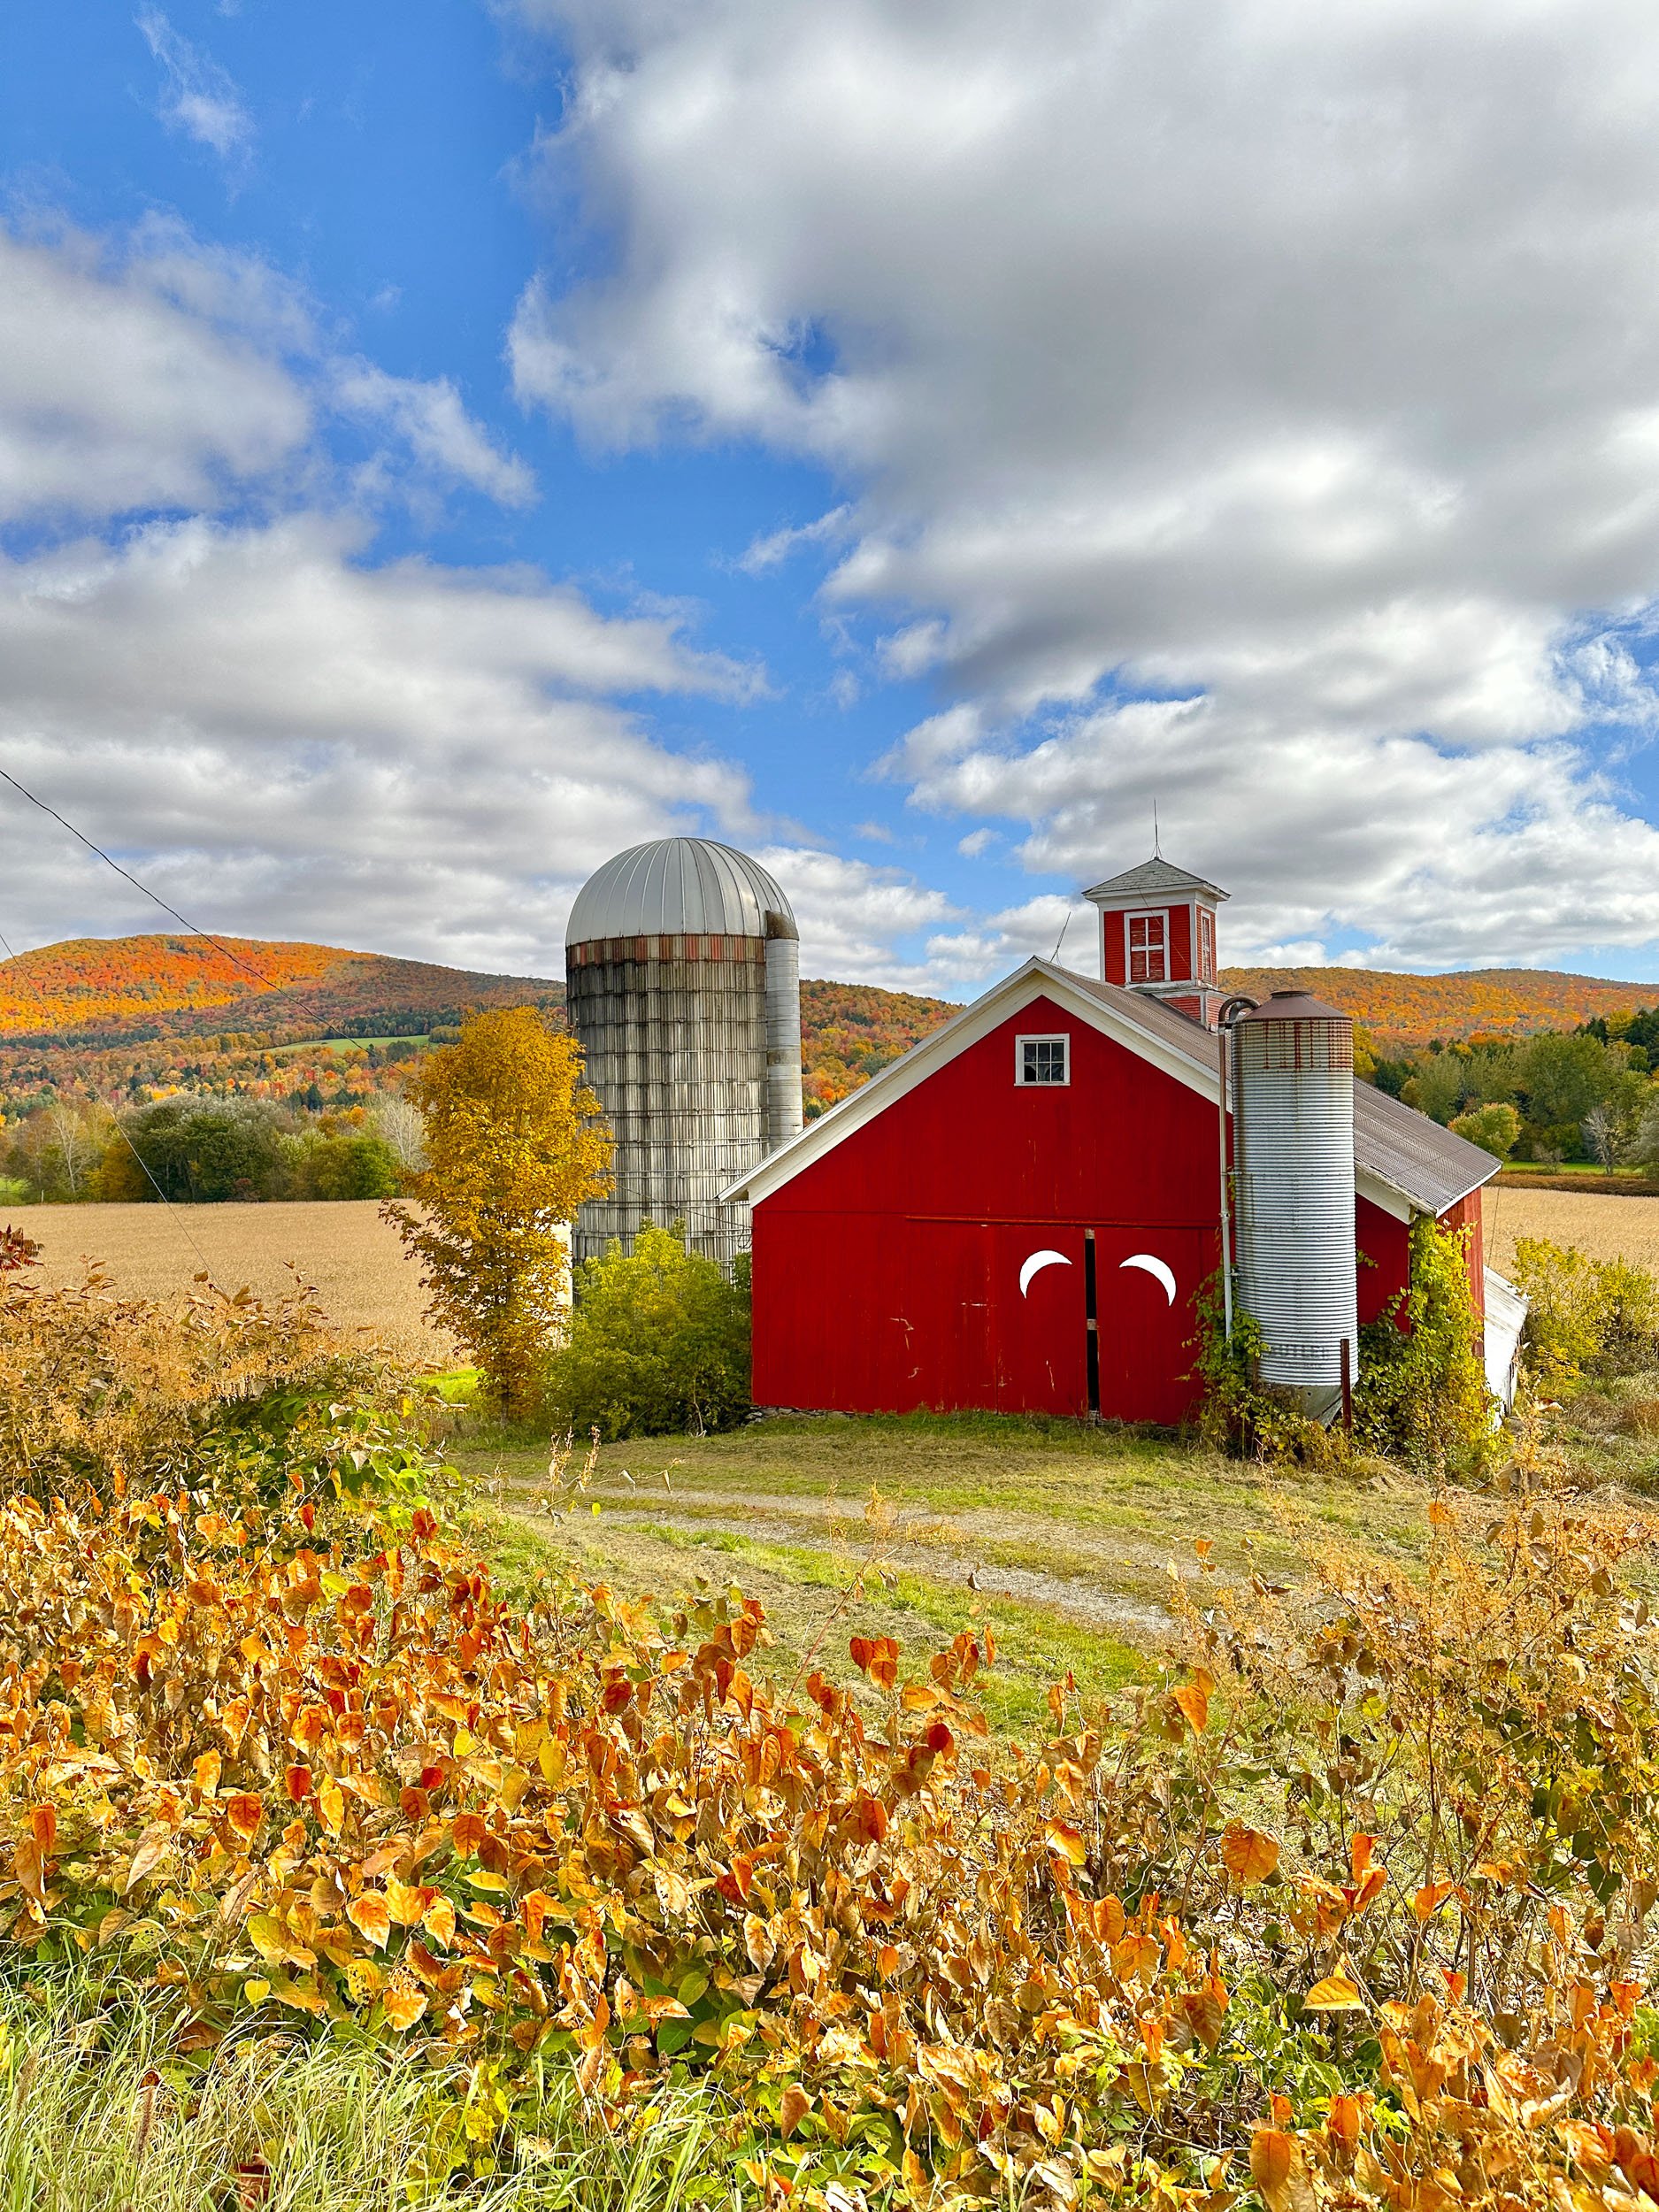 Photo of a red barn with wood silow sliver moons on the doors. The background is full of fall colored leaves on rolling hills. 